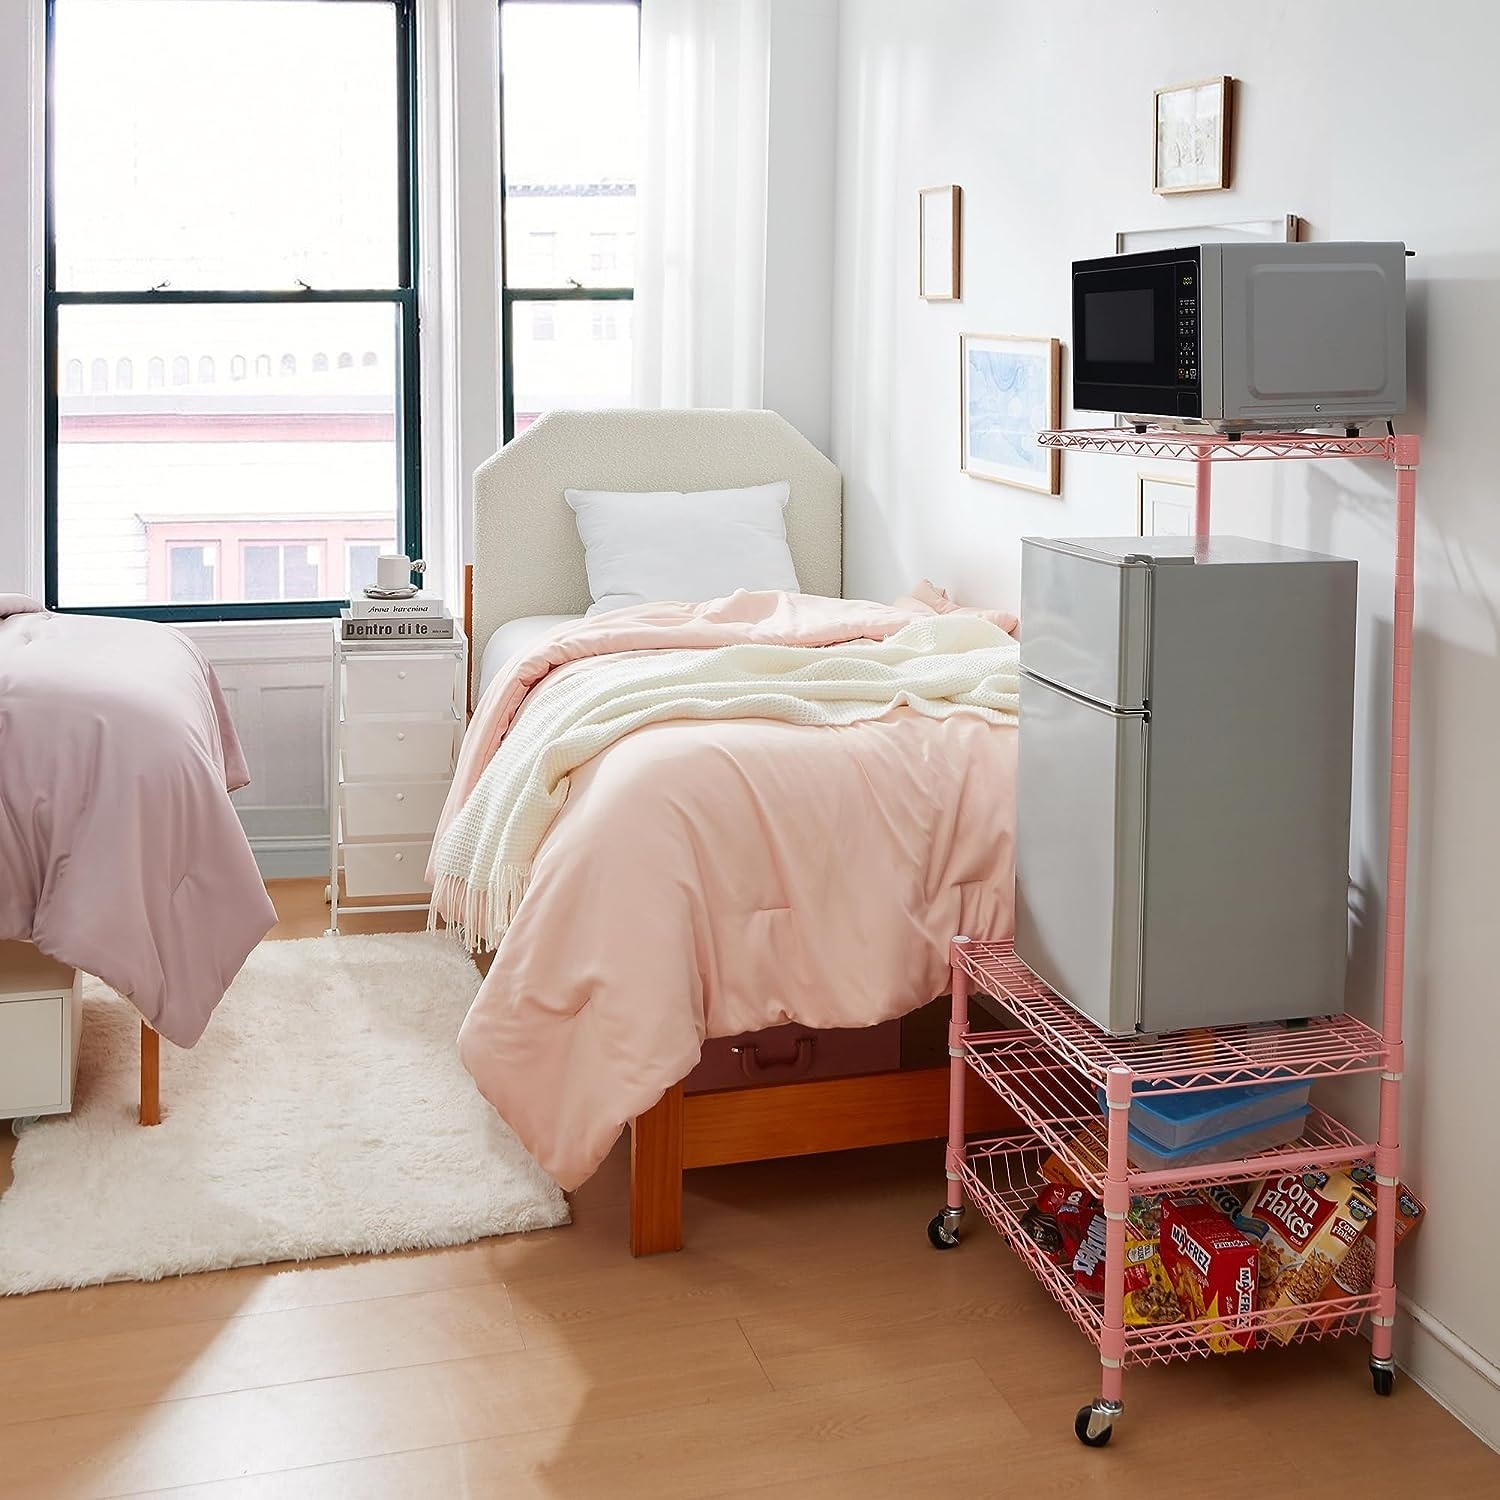 Mary Storage Cabinet with Media Outlets Can Hold a Mini Refrigerator – Luna  Dorm Interiors